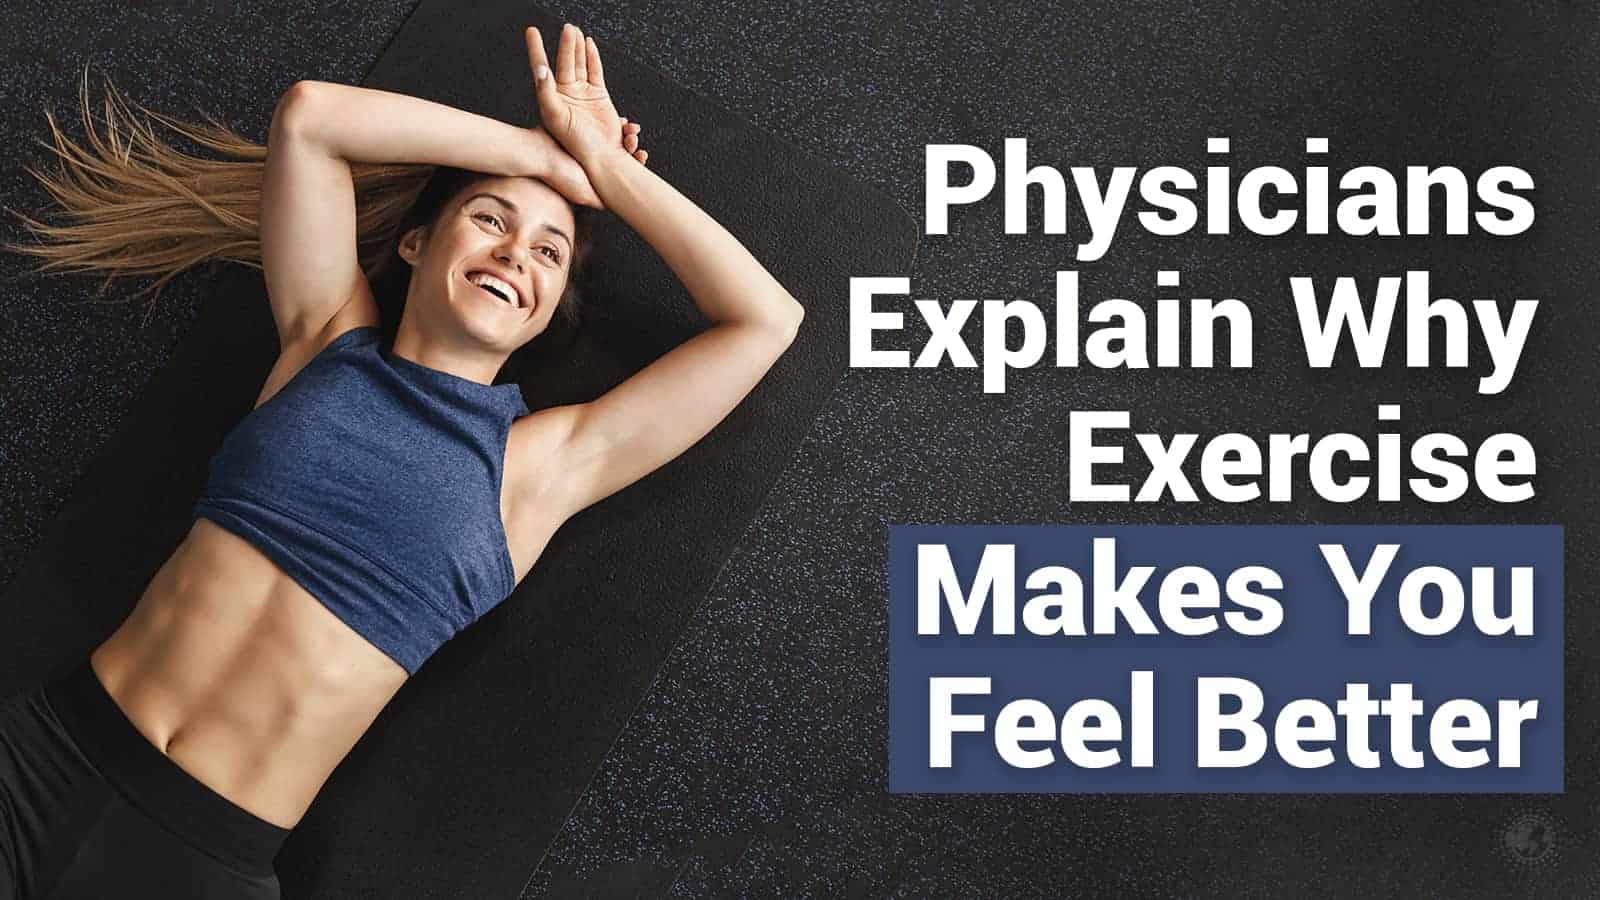 Physicians Explain Why Exercise Makes You Feel Better